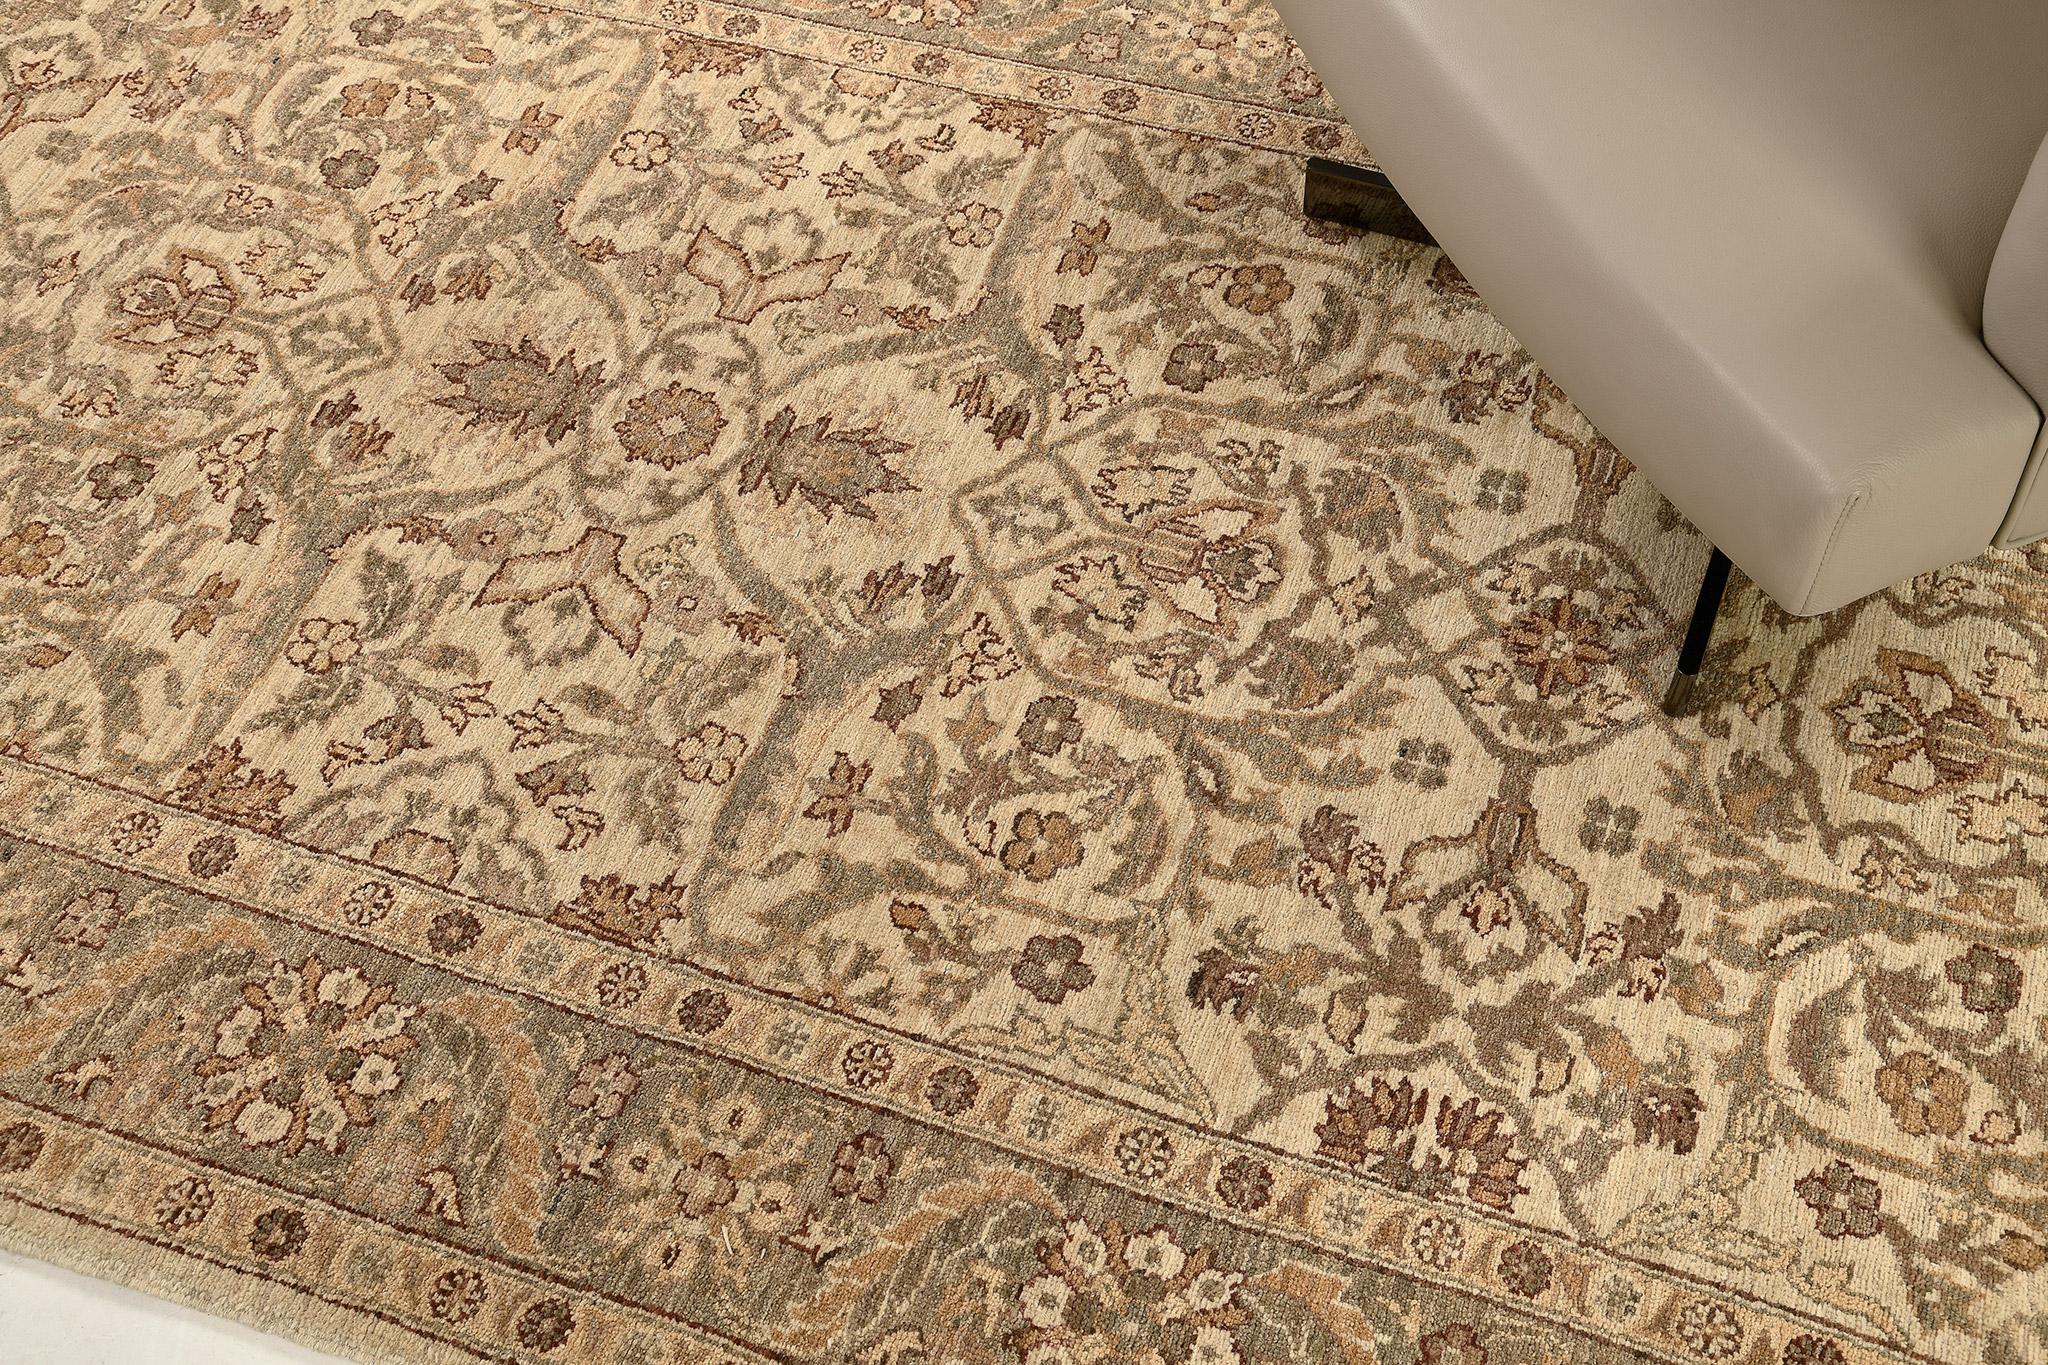 This stylish hand-spun wool revival of Oushak Runner features all stylized florid designs and medallions are embodied with this design. It creates a soulful balance of everything from mid-century modern decor to old-fashioned design. Neutral tones